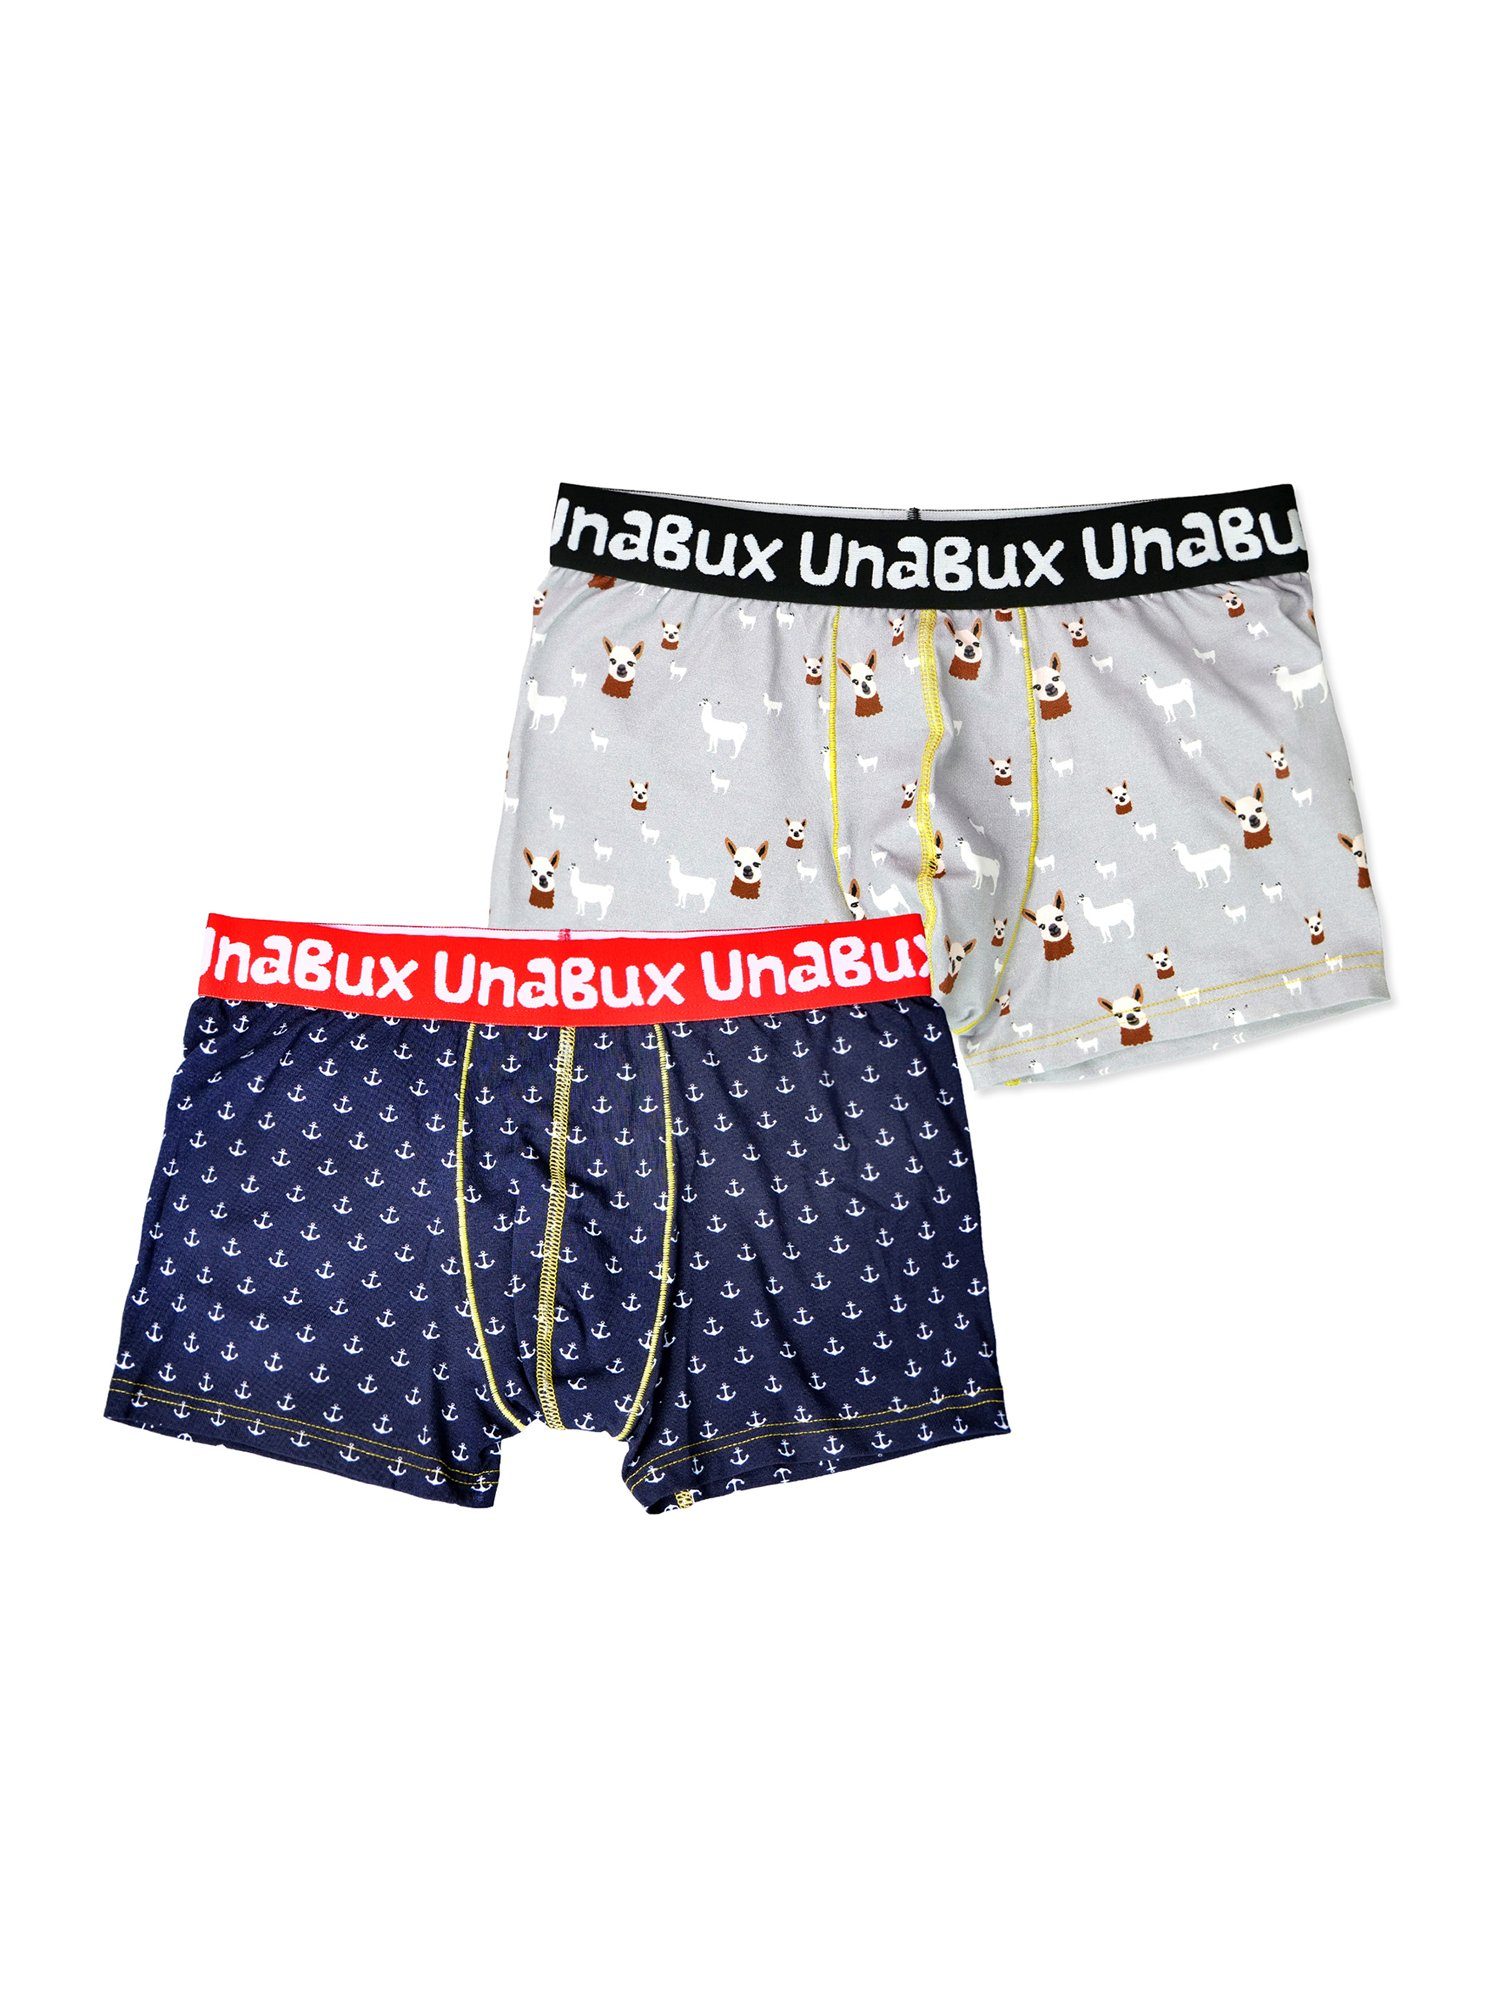 UnaBux Boxer Briefs WOOLHEAD / FIVE FINGERS Doppelpack Boxershorts (2-St) GOOD OLD ANCHOR